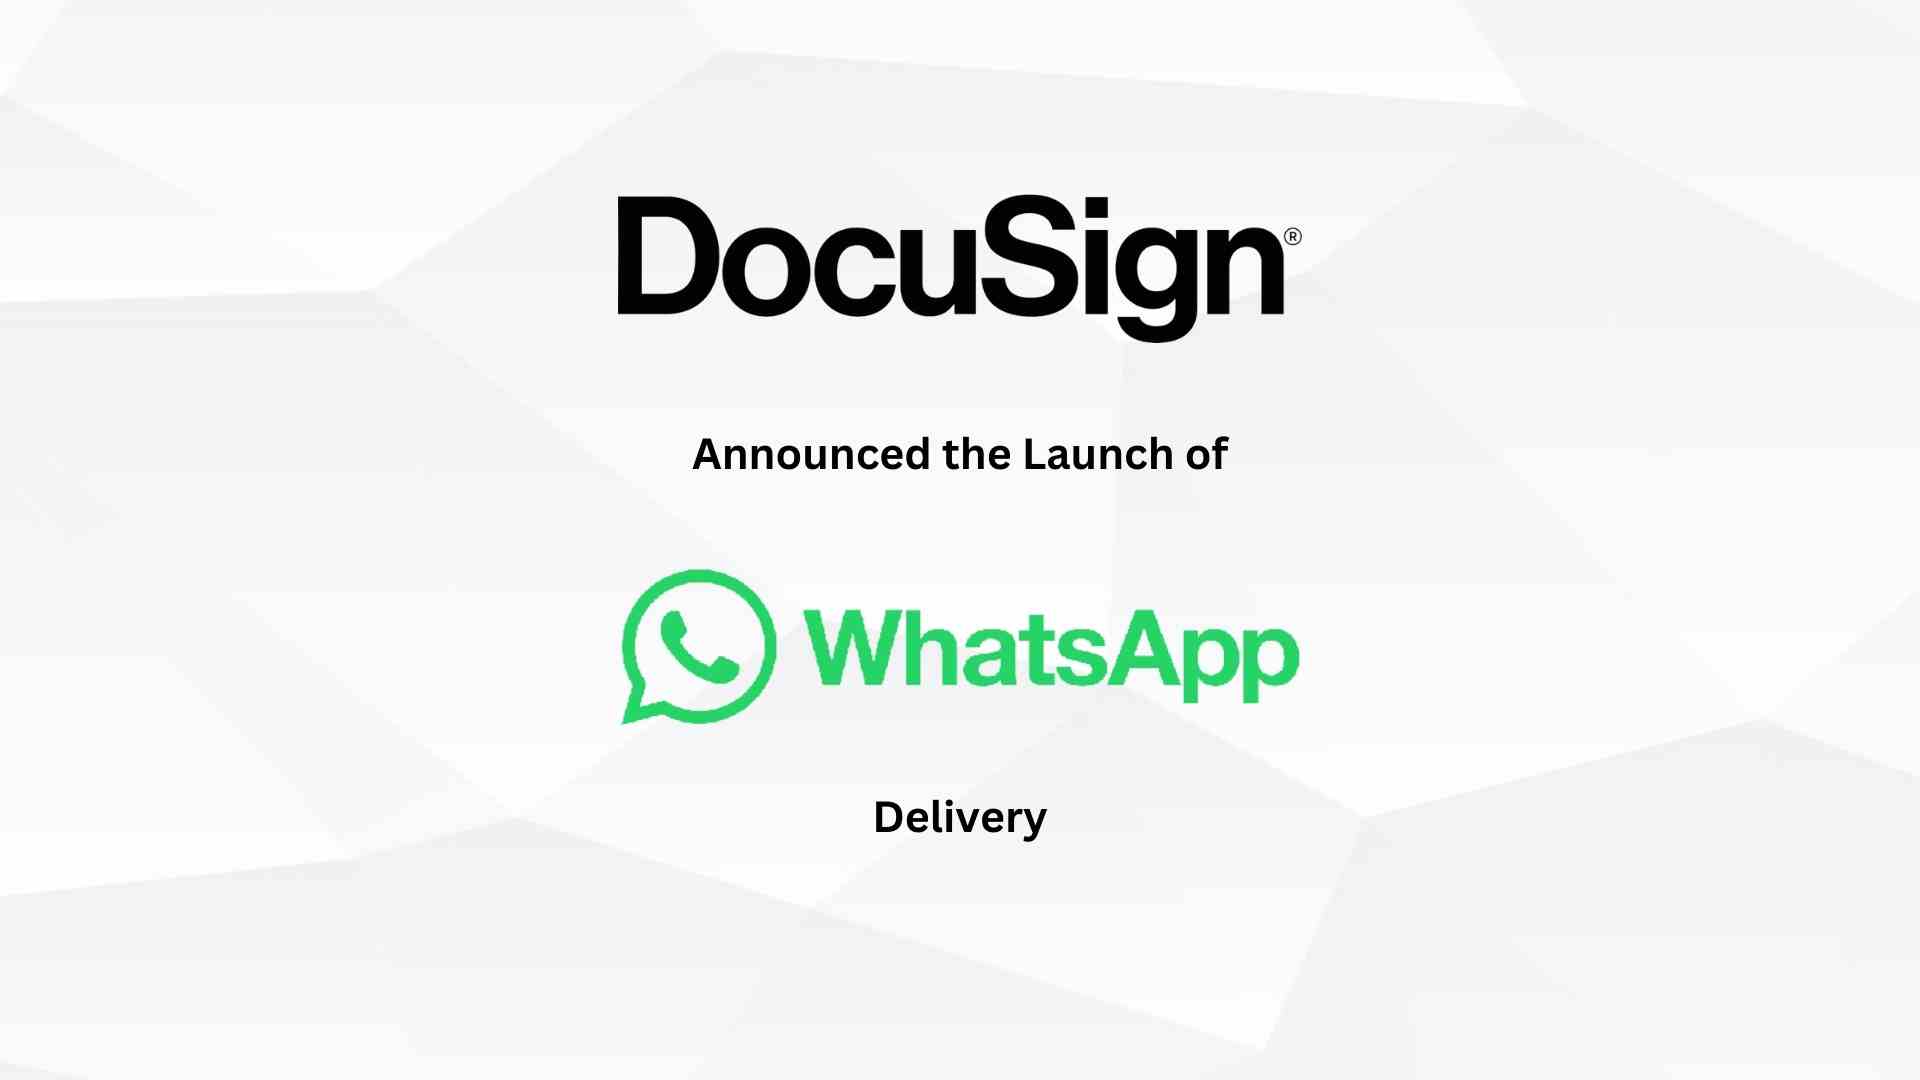 DocuSign Launches WhatsApp Integration to Accelerate Business Around the Globe